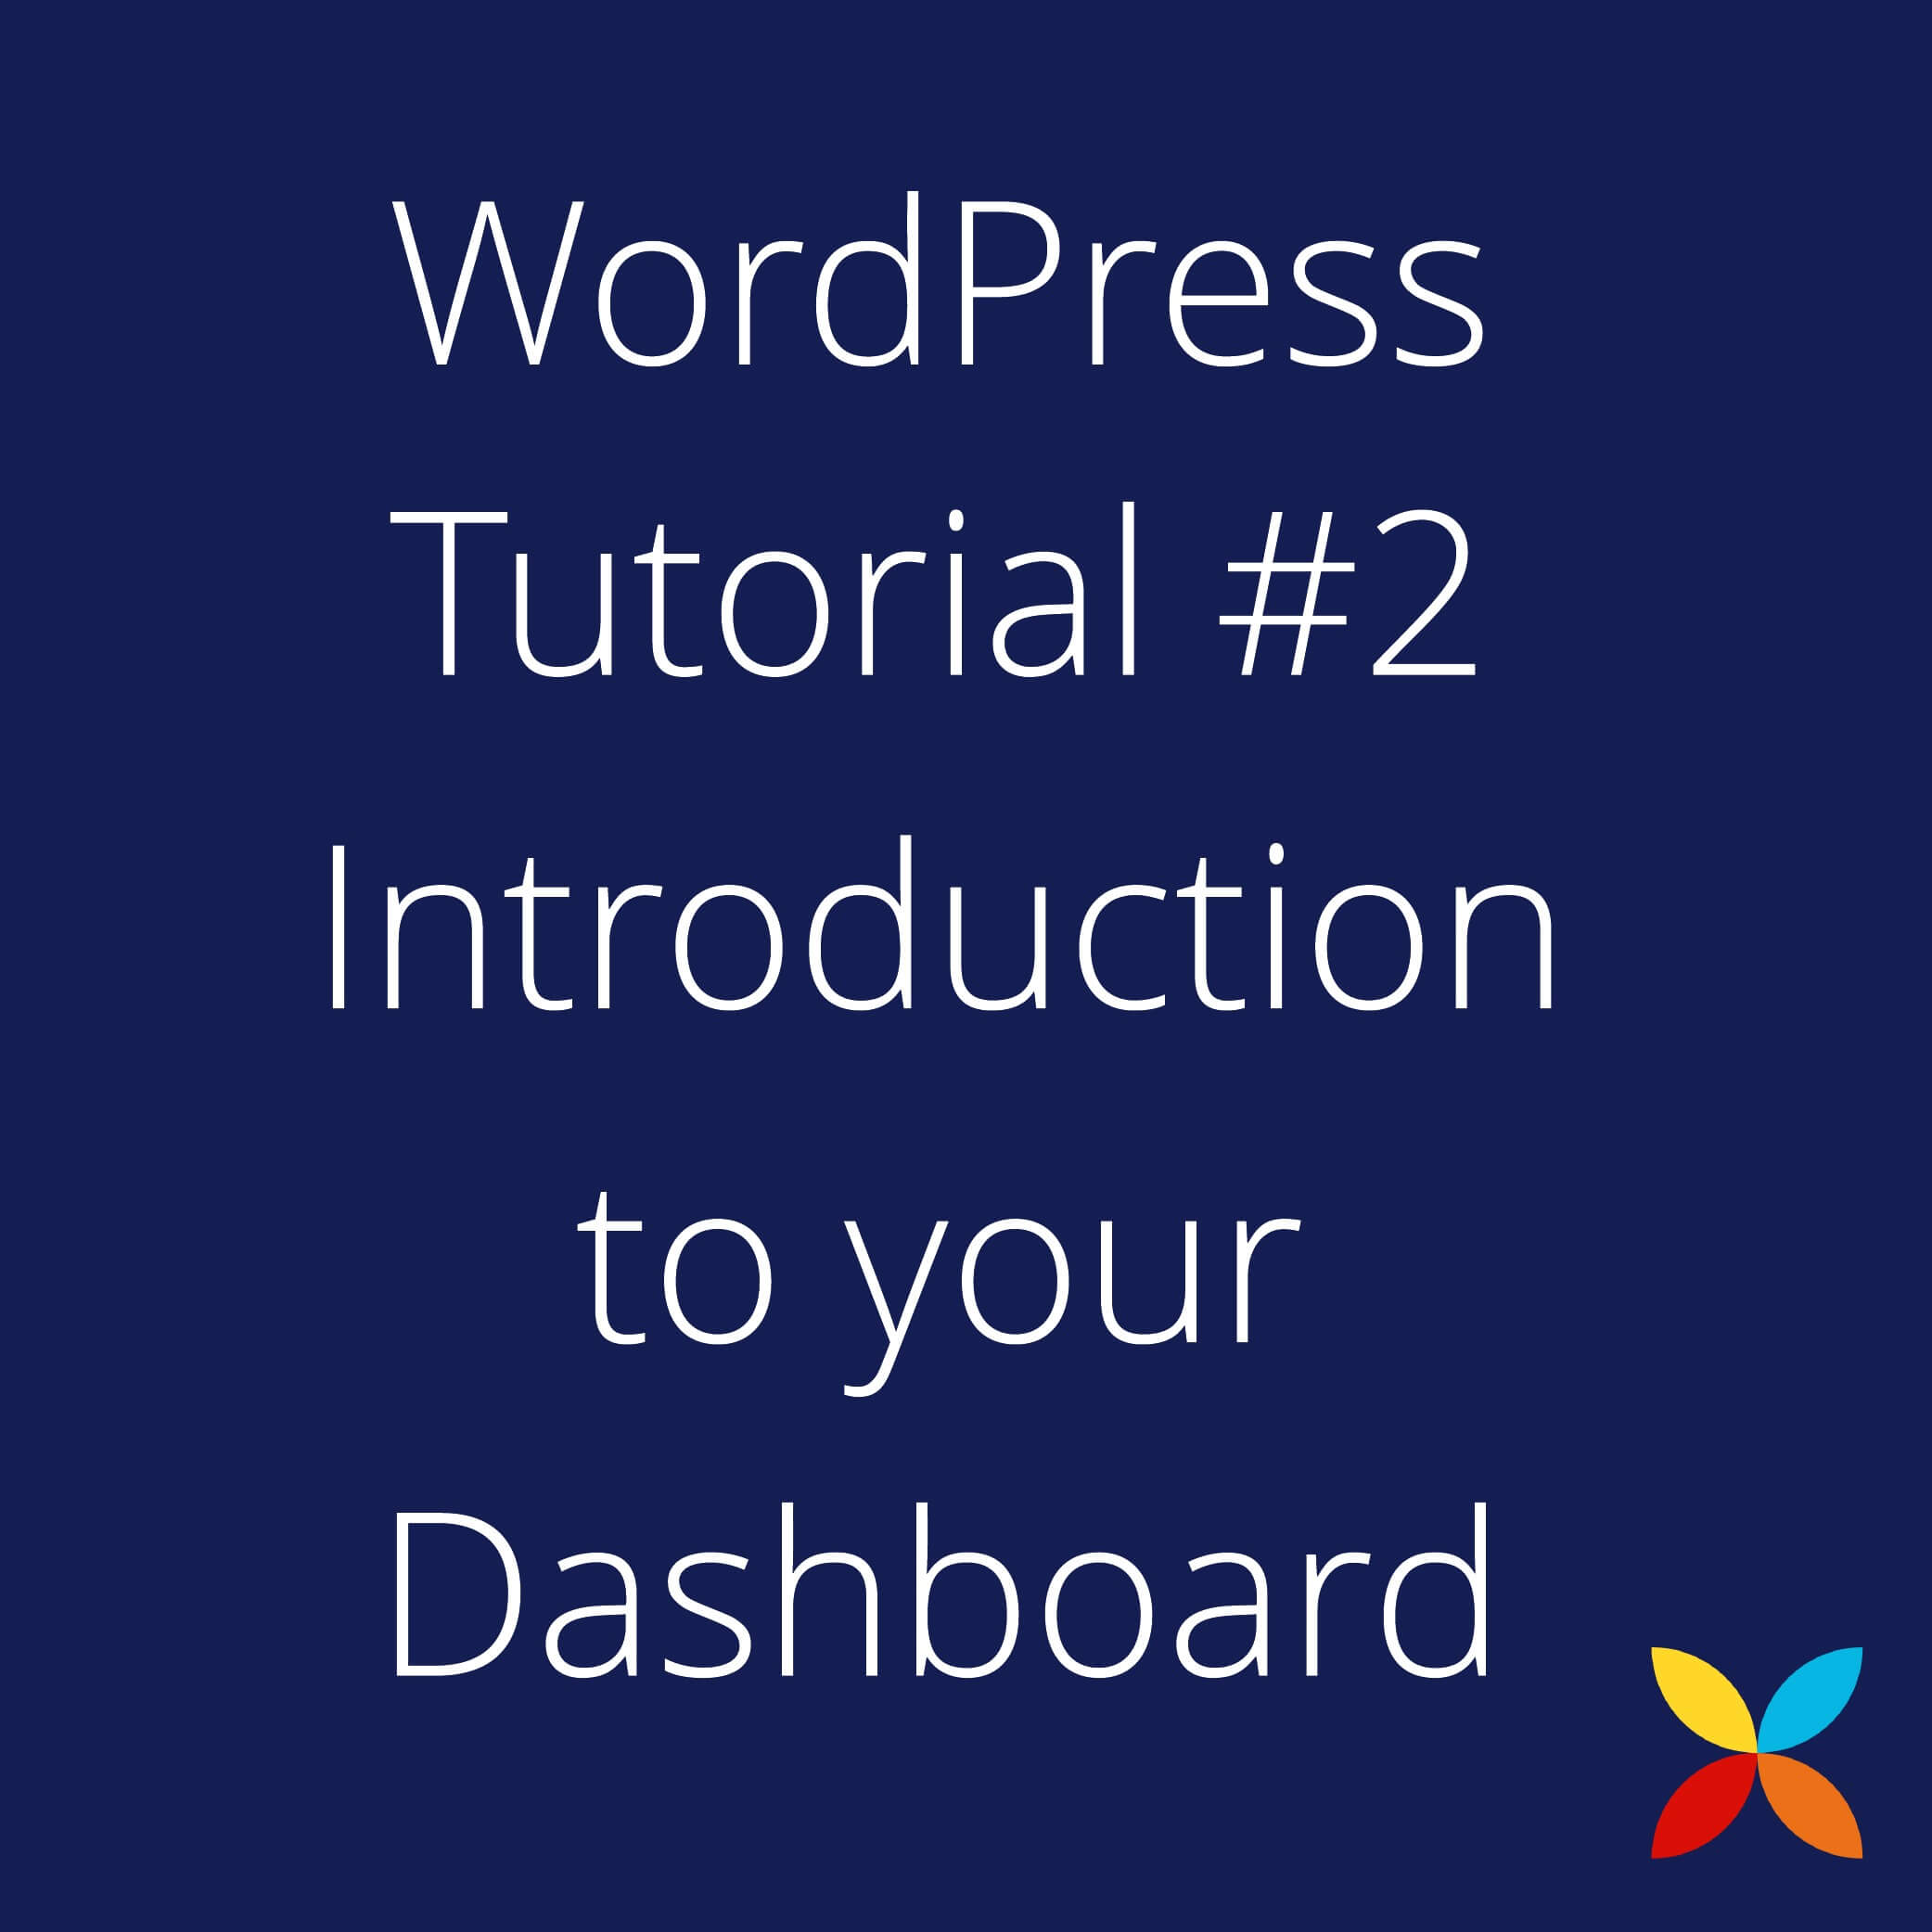 Introduction to your Dashboard